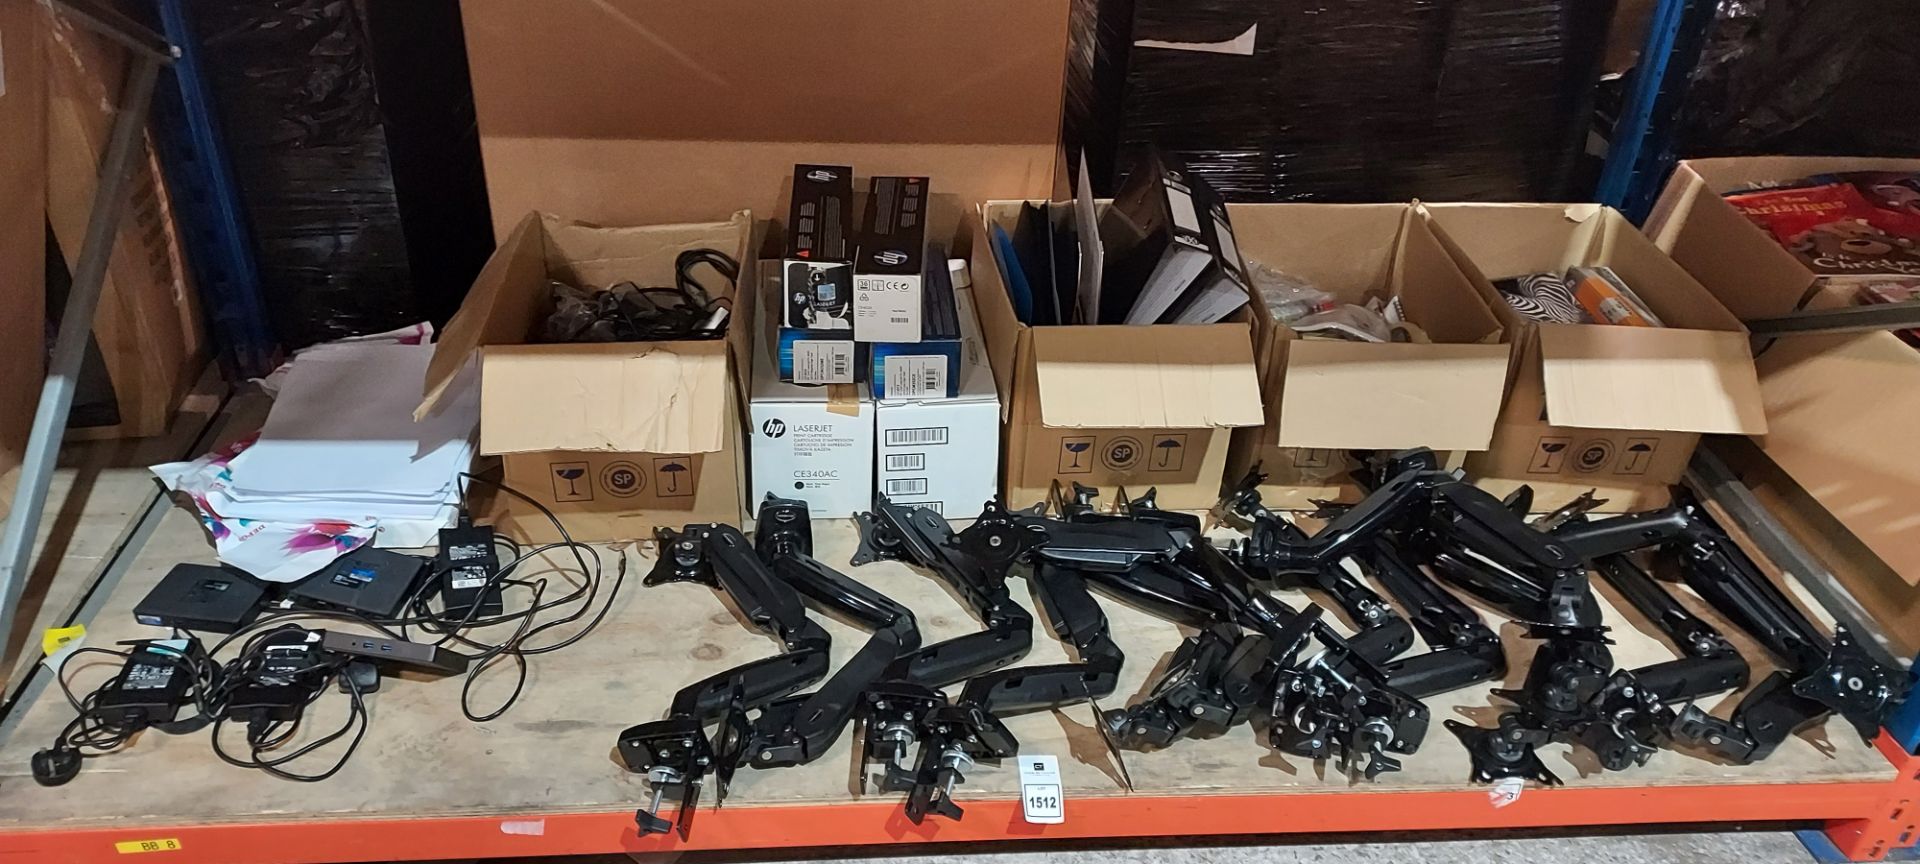 FULL BAY MIXED LOT CONTAINING 15 X INVISION SINGLE MONITOR ARM / HP (CF403X)(CF401X) ( CE340AC)